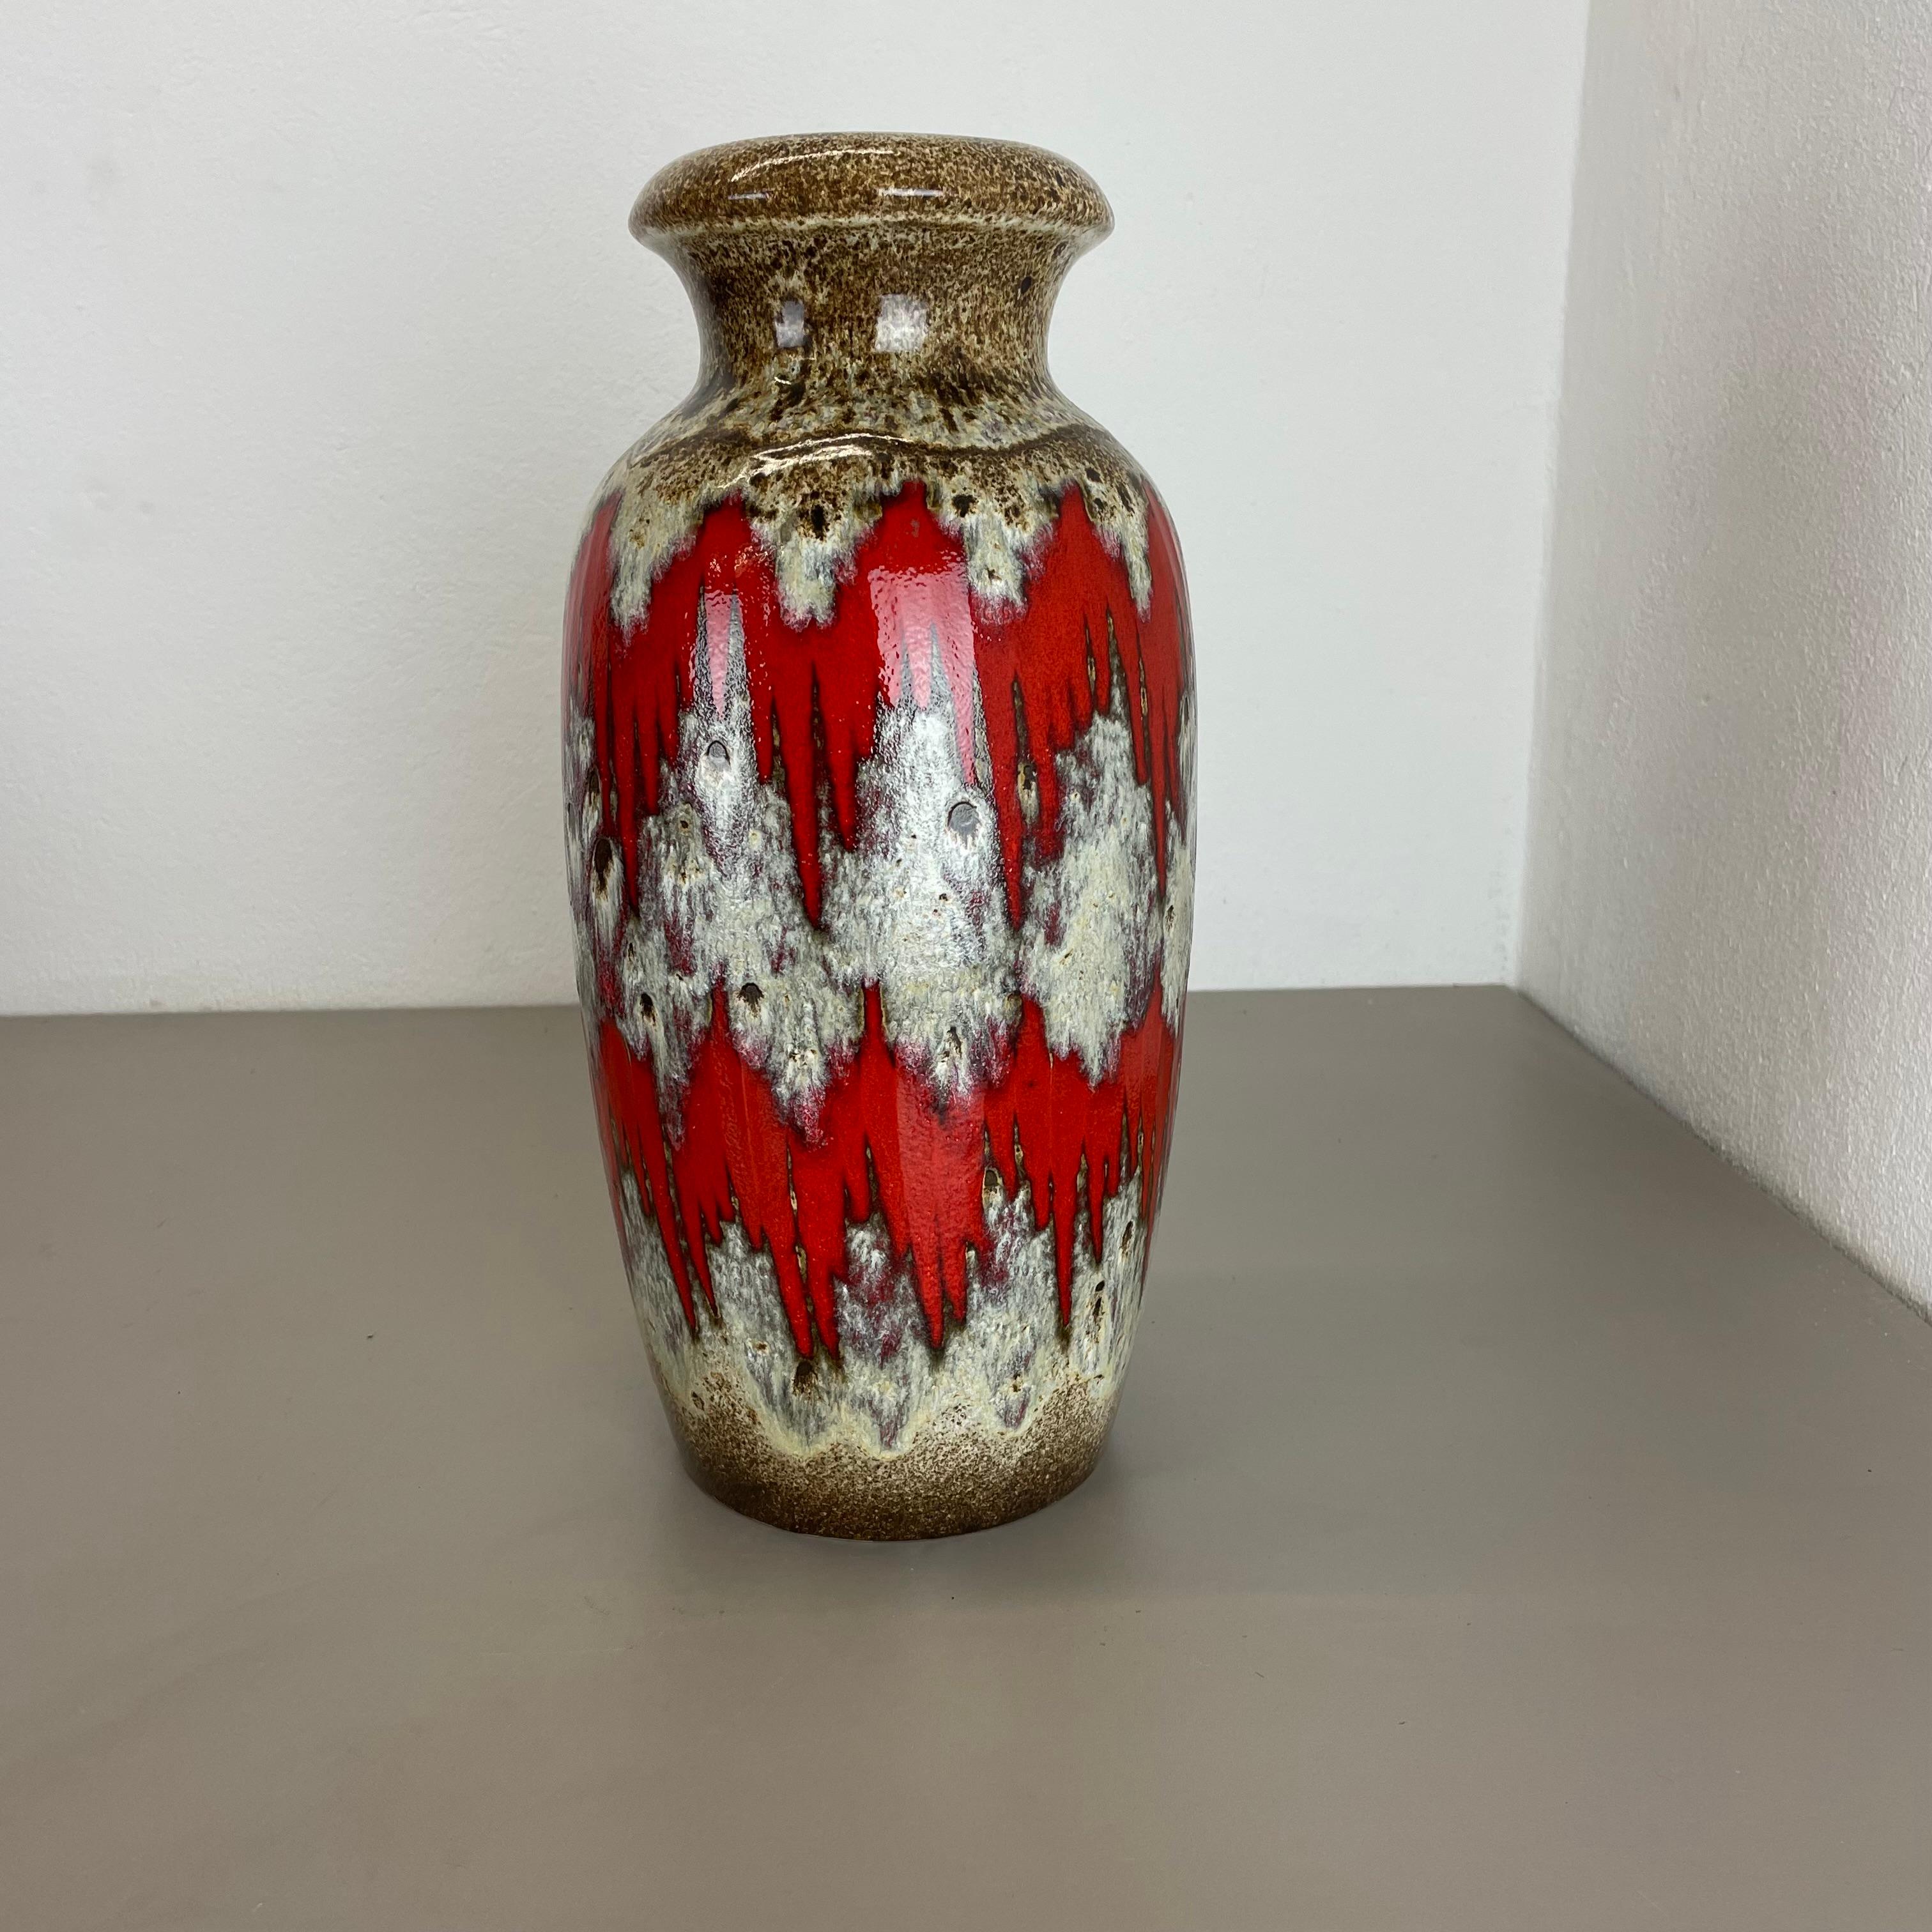 Article:

Fat lava art vase super rare LORA DECOR.



Producer:

Scheurich, Germany



Decade:

1970s




This original vintage vase was produced in the 1970s in Germany by Scheurich. It is made of ceramic pottery in fat lava optic. Super rare in